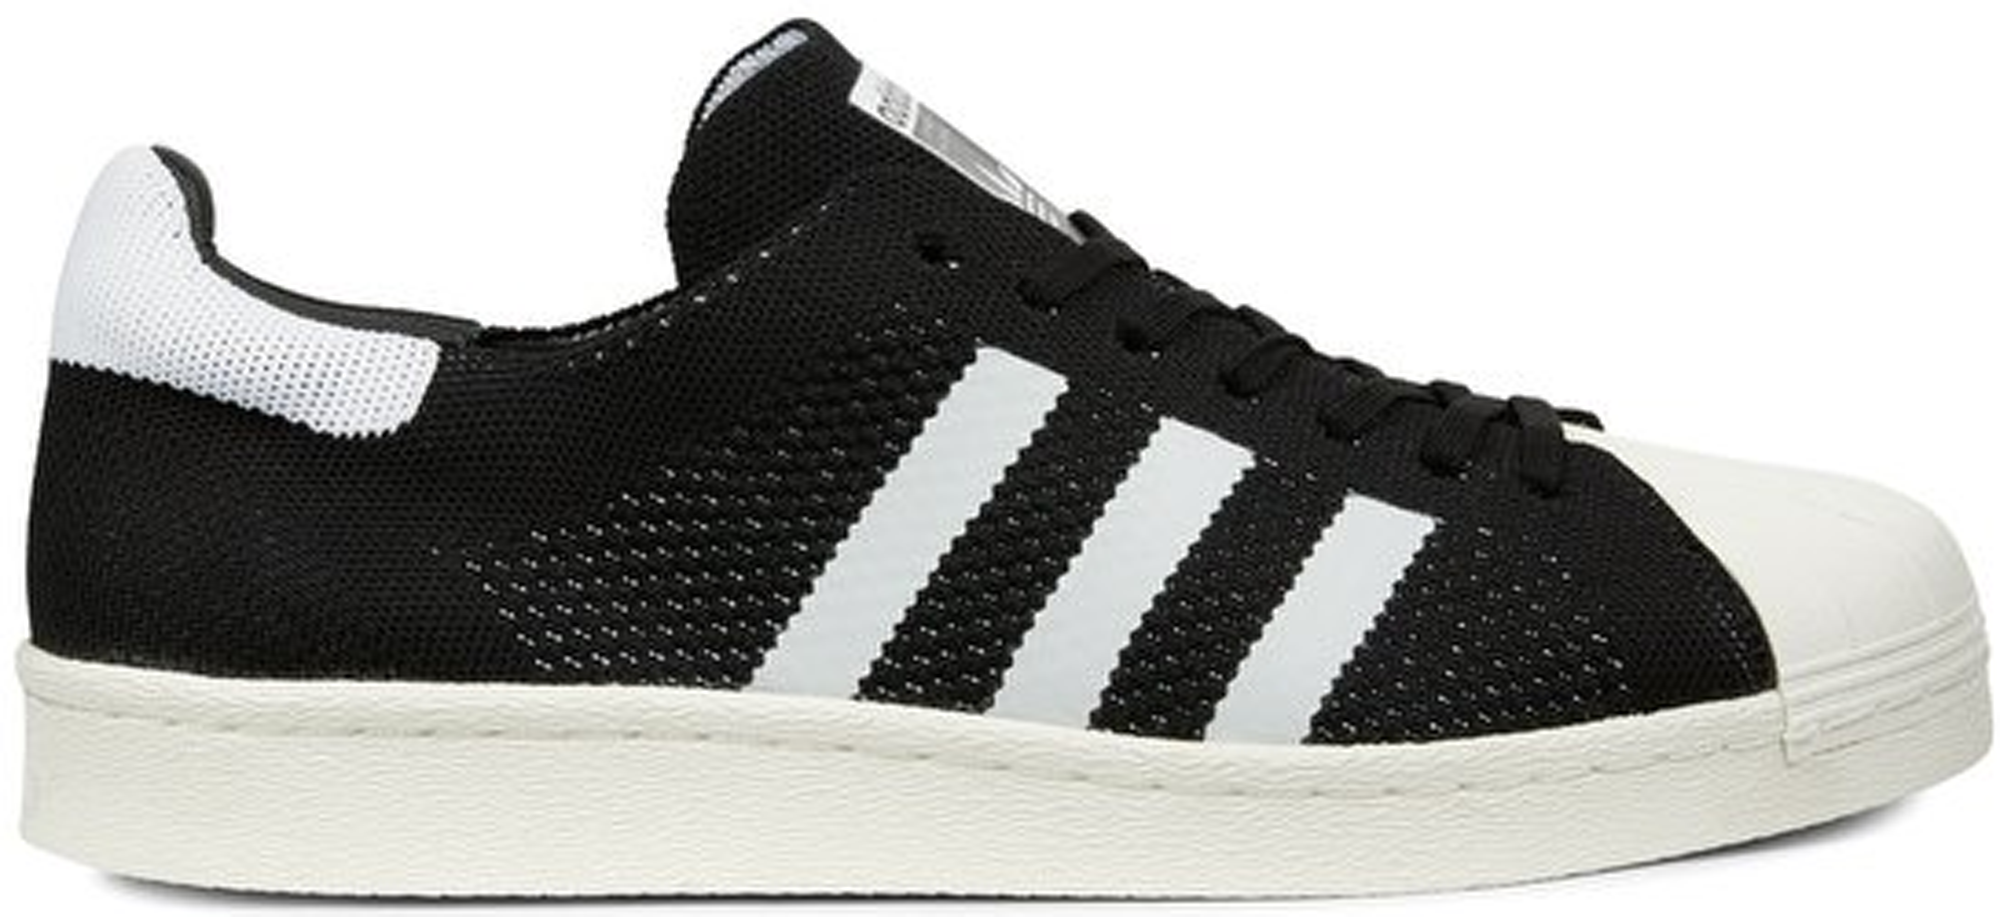 superstar boost shoes